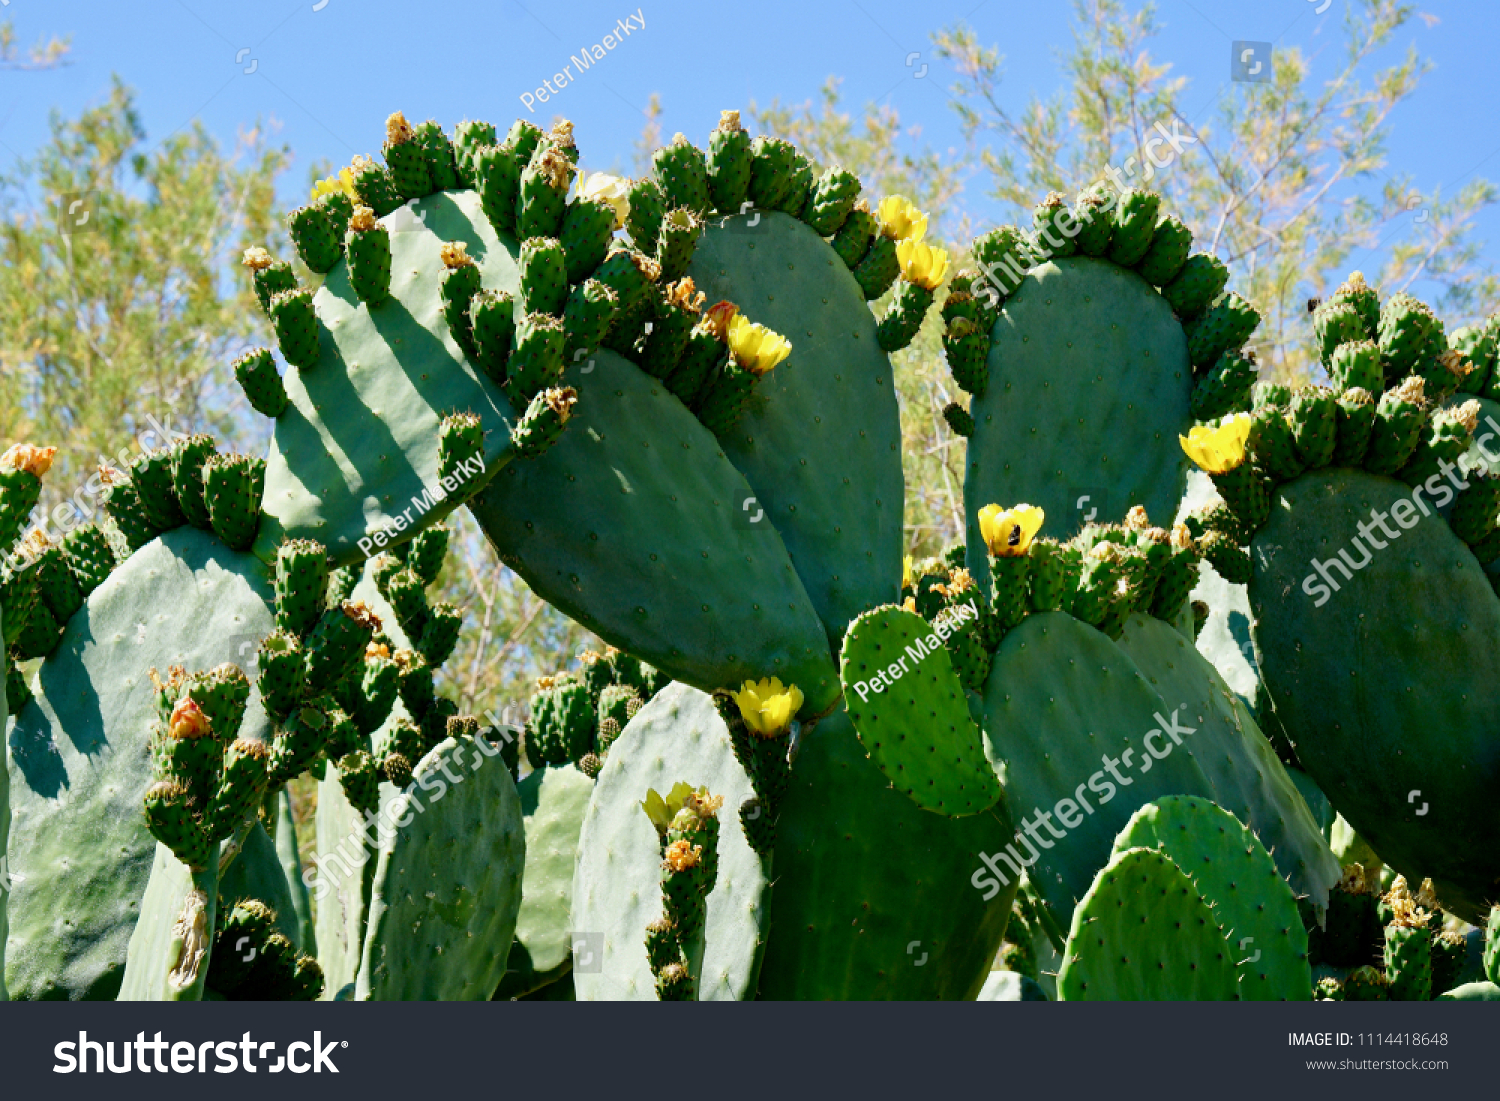 Purple Prickly Pear Cactus Fruit Blooming Stock Photo Edit Now 1114418648